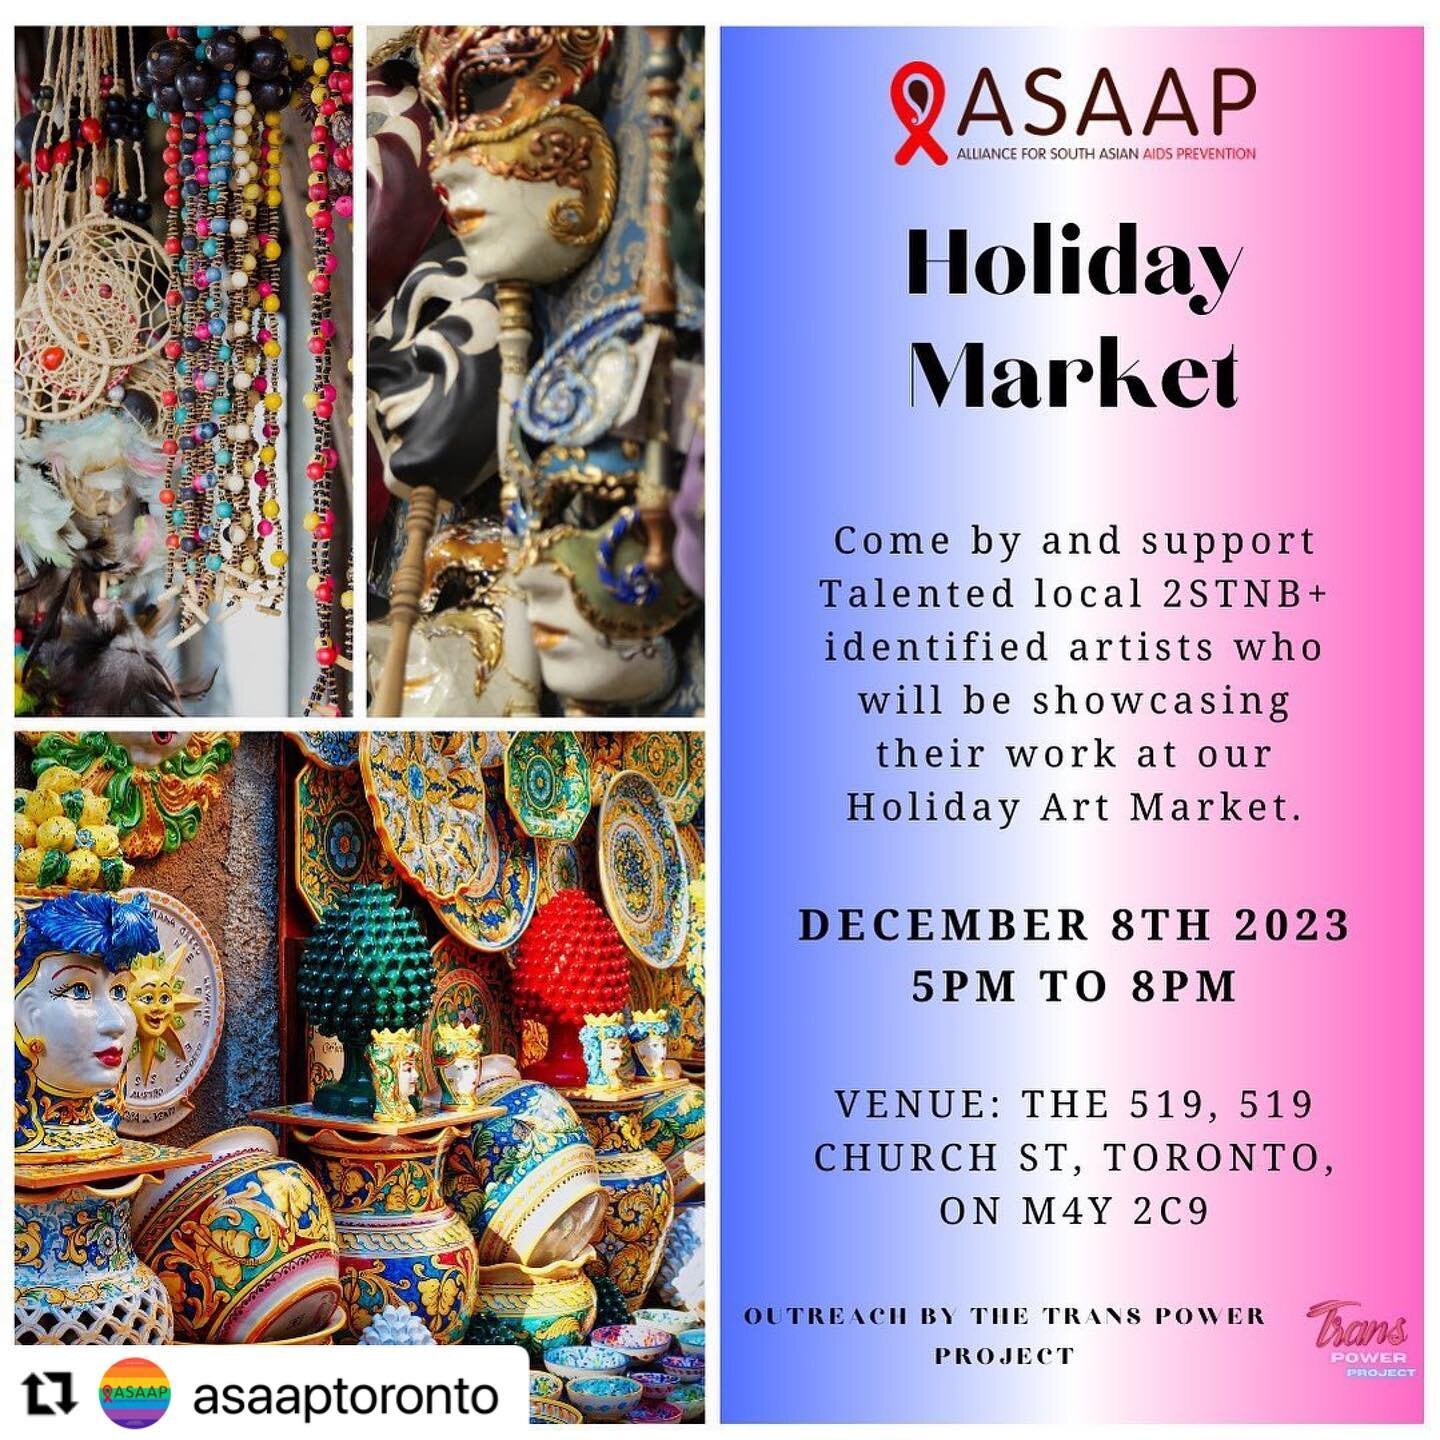 I&rsquo;ll be showcasing my book and art at the @asaaptoronto holiday market! Come by @the519 December 8th at 5-8pm and support local 2SLGBTQIA+ artists. Support the community *and* do your holiday shopping! ❄️❄️❄️ #lgbtq #queer #queertoronto